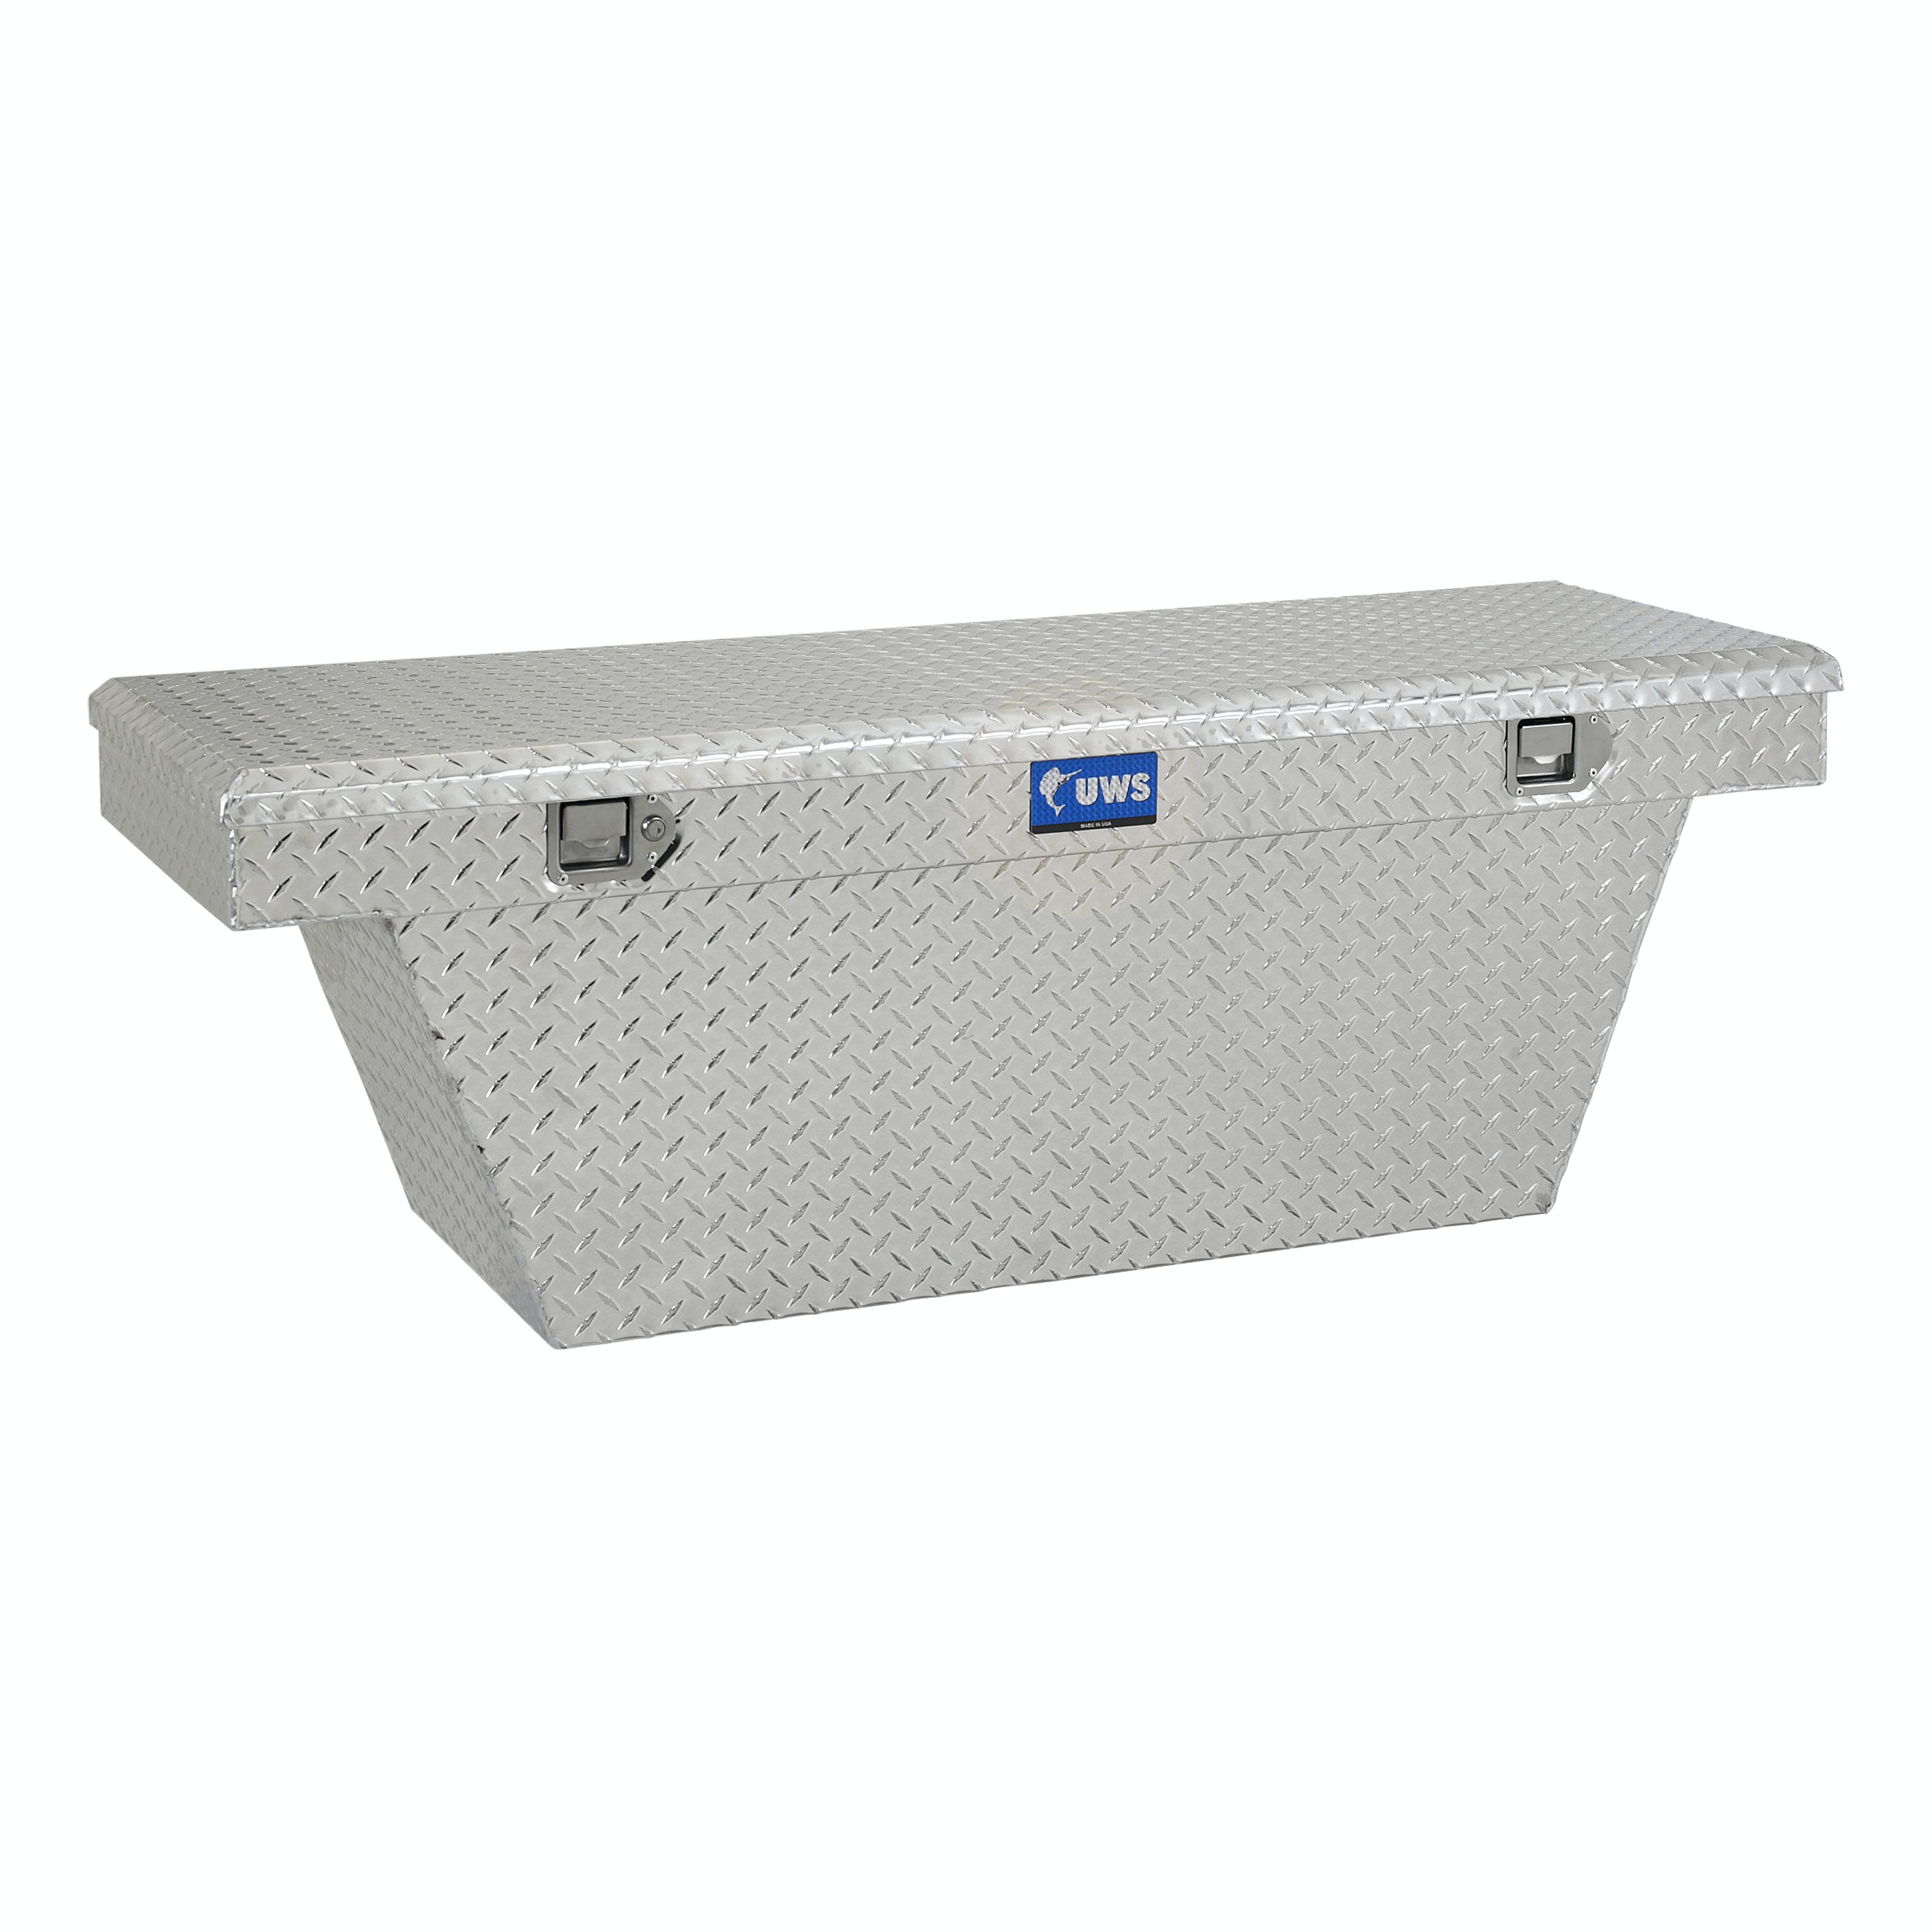 UWS TBSD-60A 60 inch Aluminum Single Lid Crossover Toolbox Deep Angled